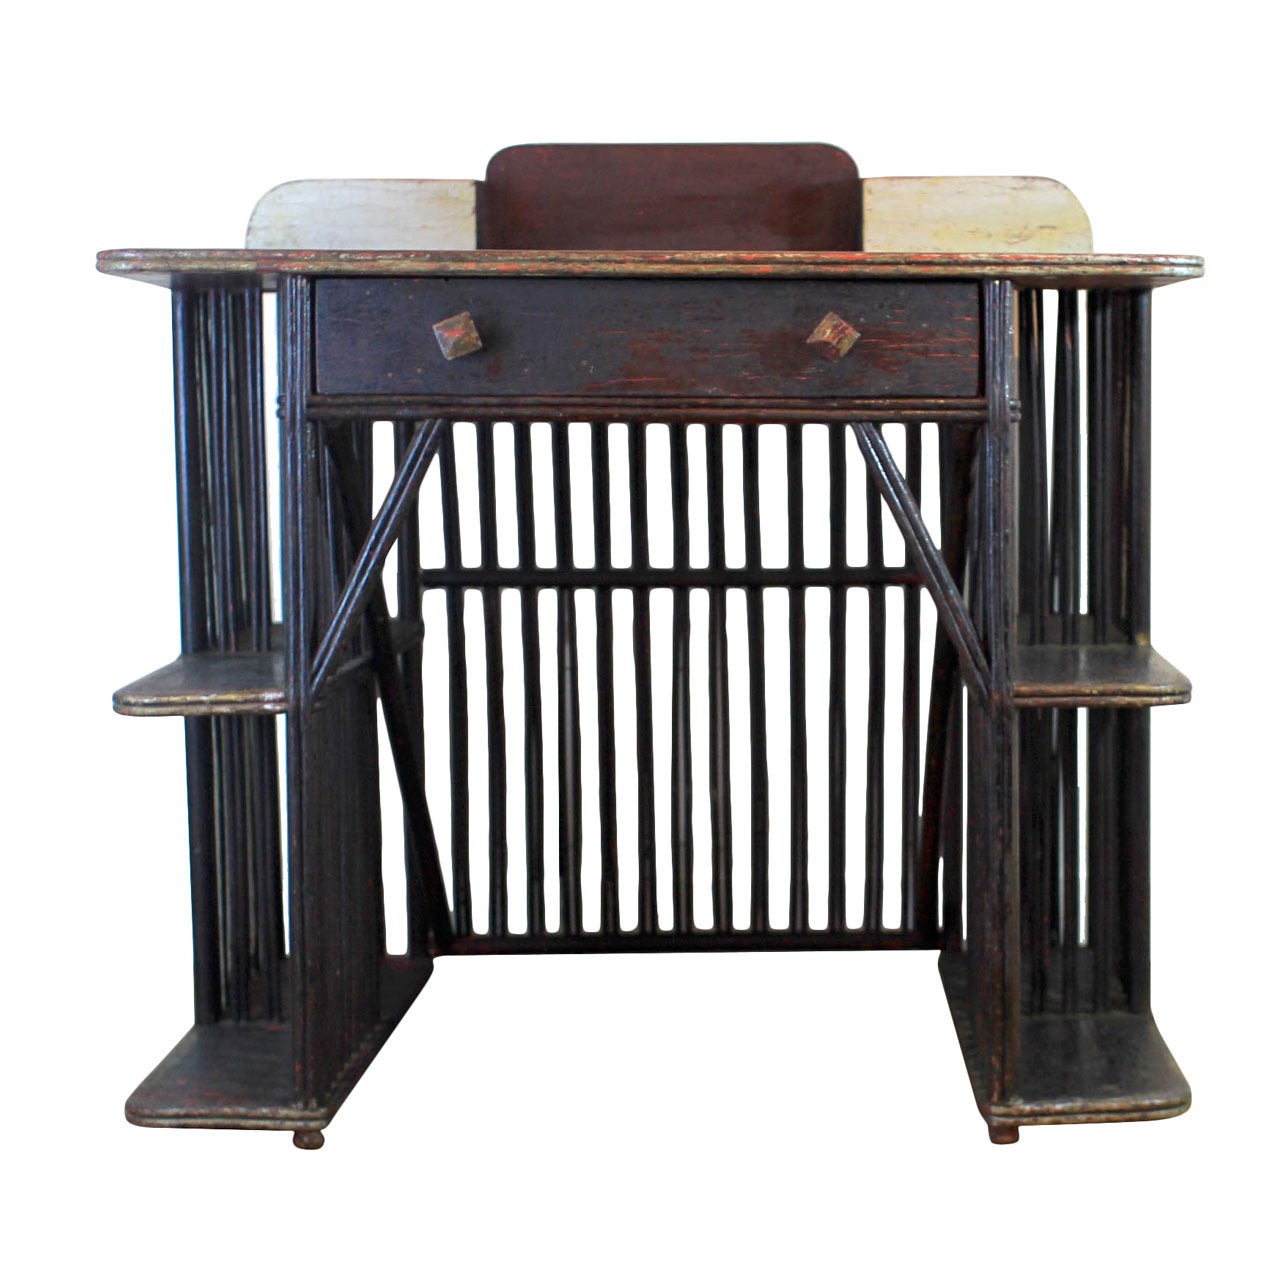 Early 20th Century Rustic Desk